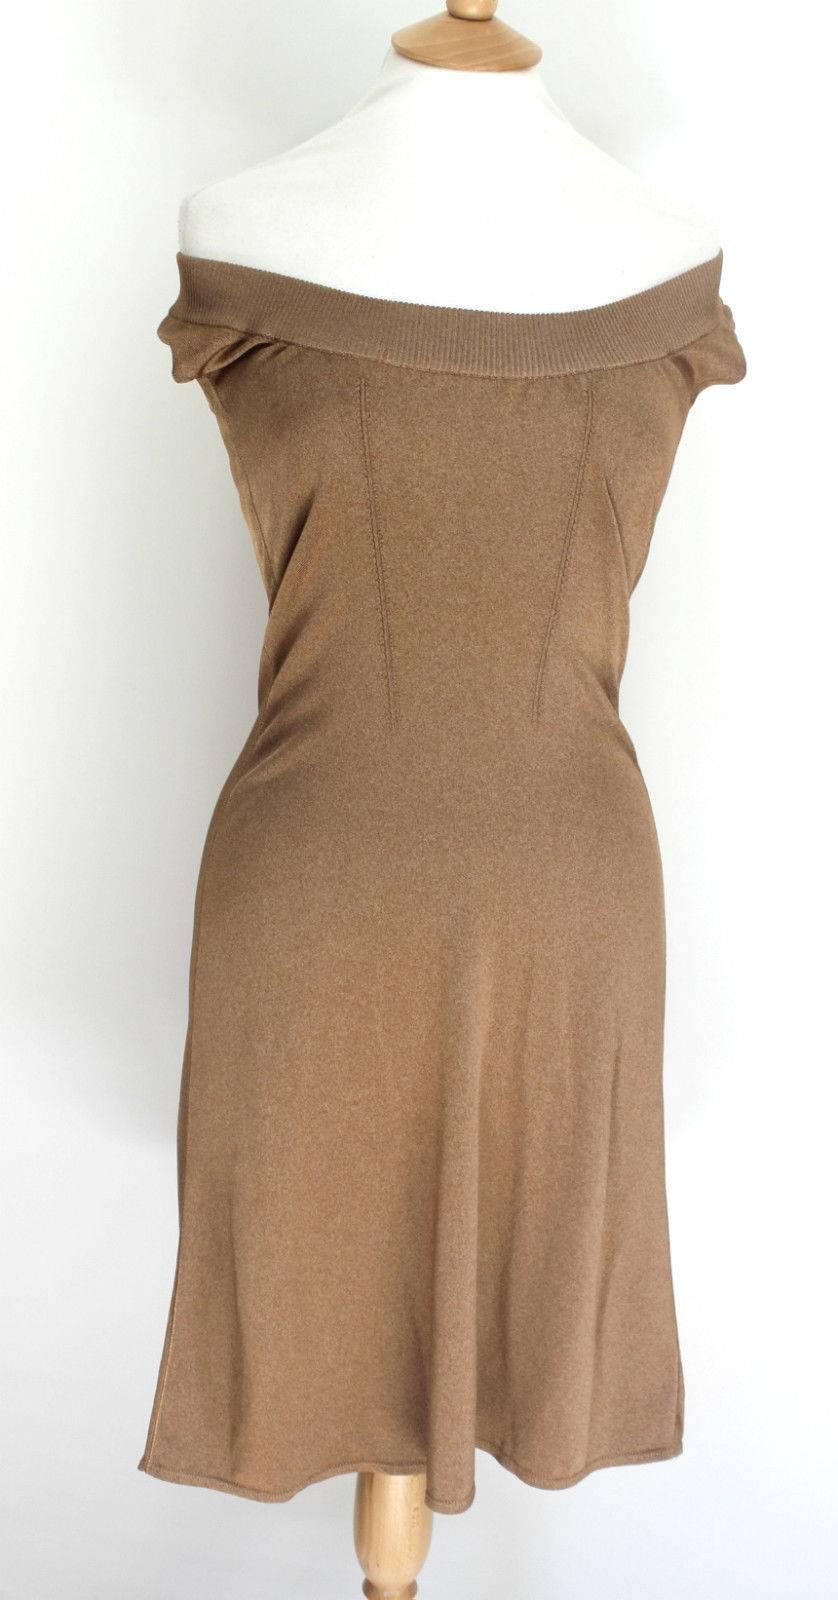 Vintage Azzadine ALAIA Beige metallic knit skater stretch dress M In Excellent Condition For Sale In London, GB